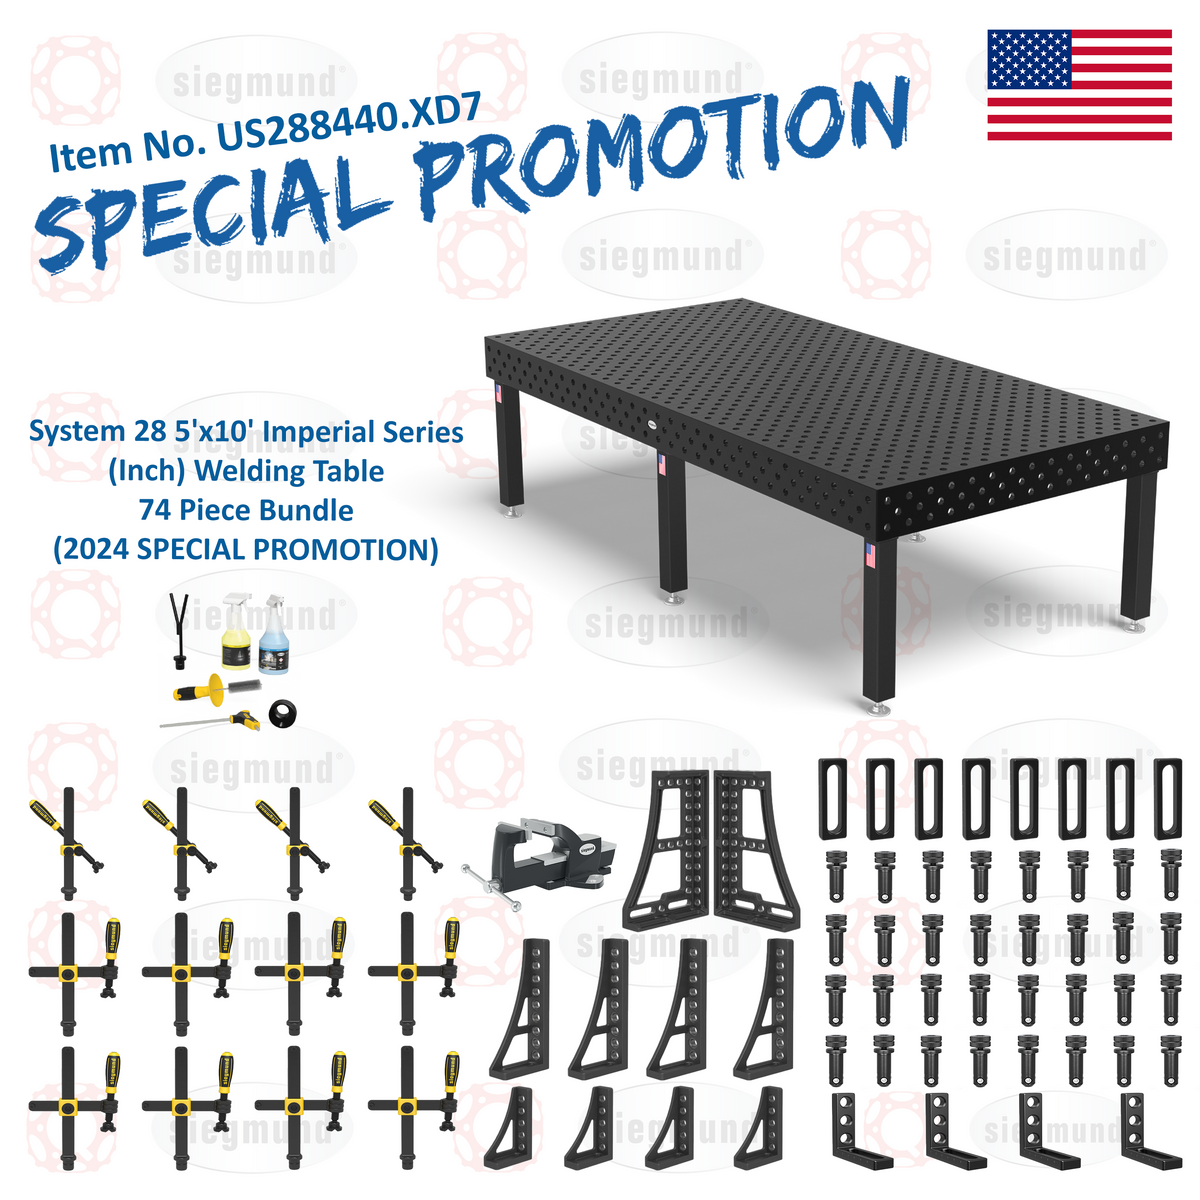 US288440.XD7: System 28 5'x10' (60"x120") Imperial Series (Inch) Welding Table 74 Piece Bundle (2024 SPECIAL PROMOTION)